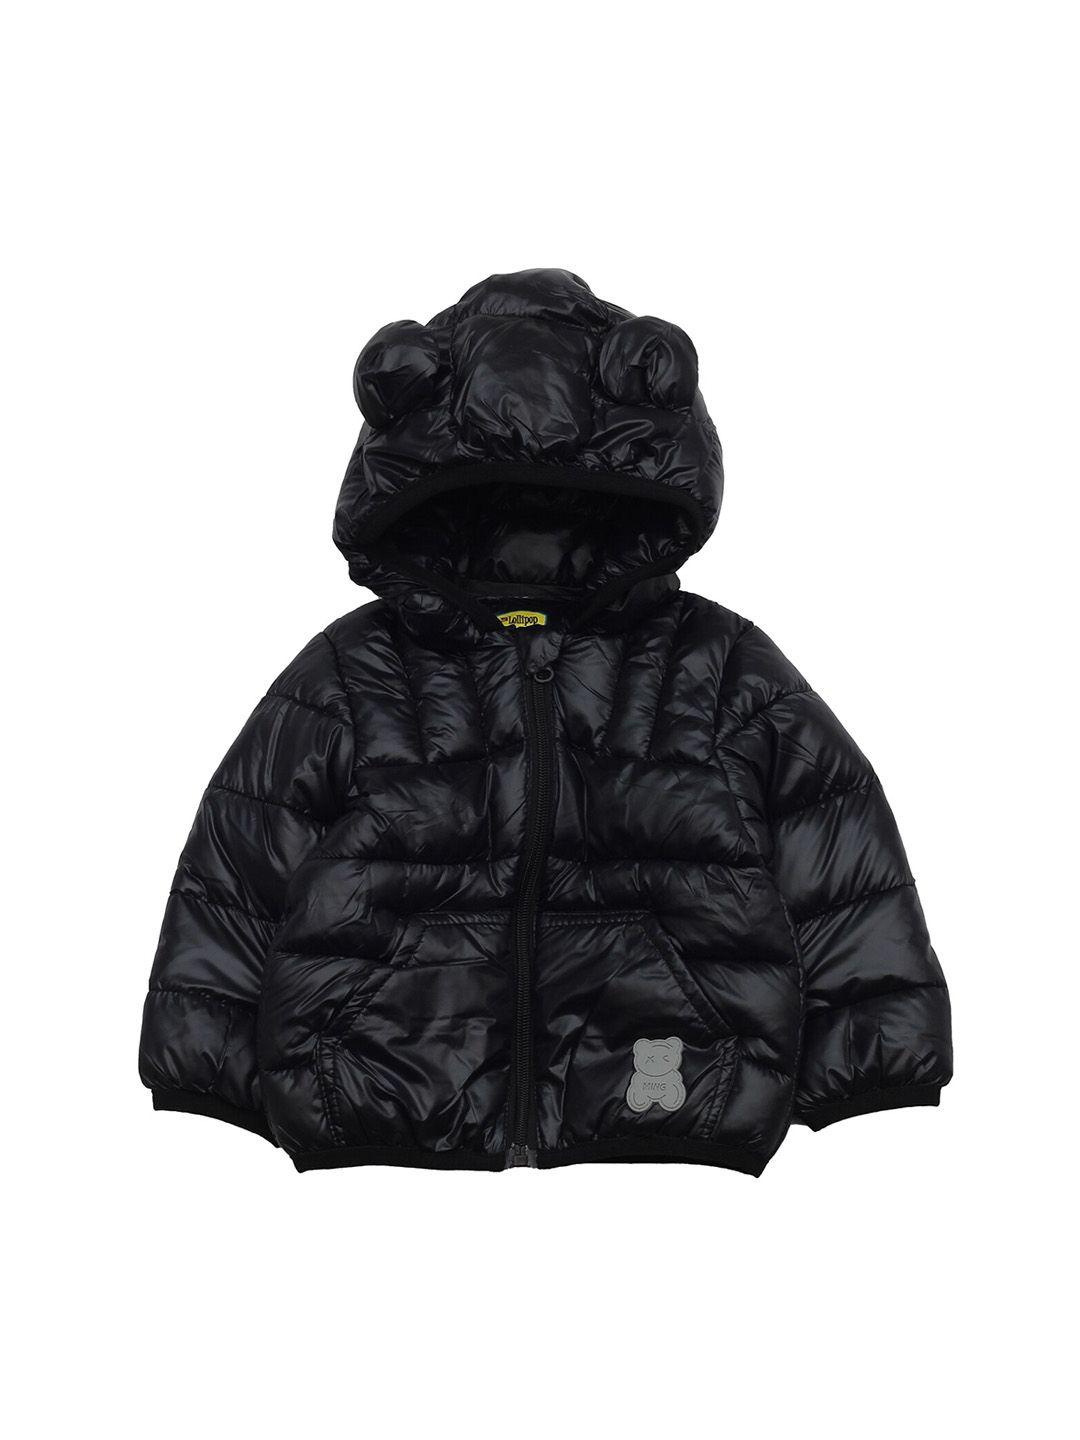 lil lollipop unisex kids black camouflage lightweight outdoor puffer jacket with embroidered